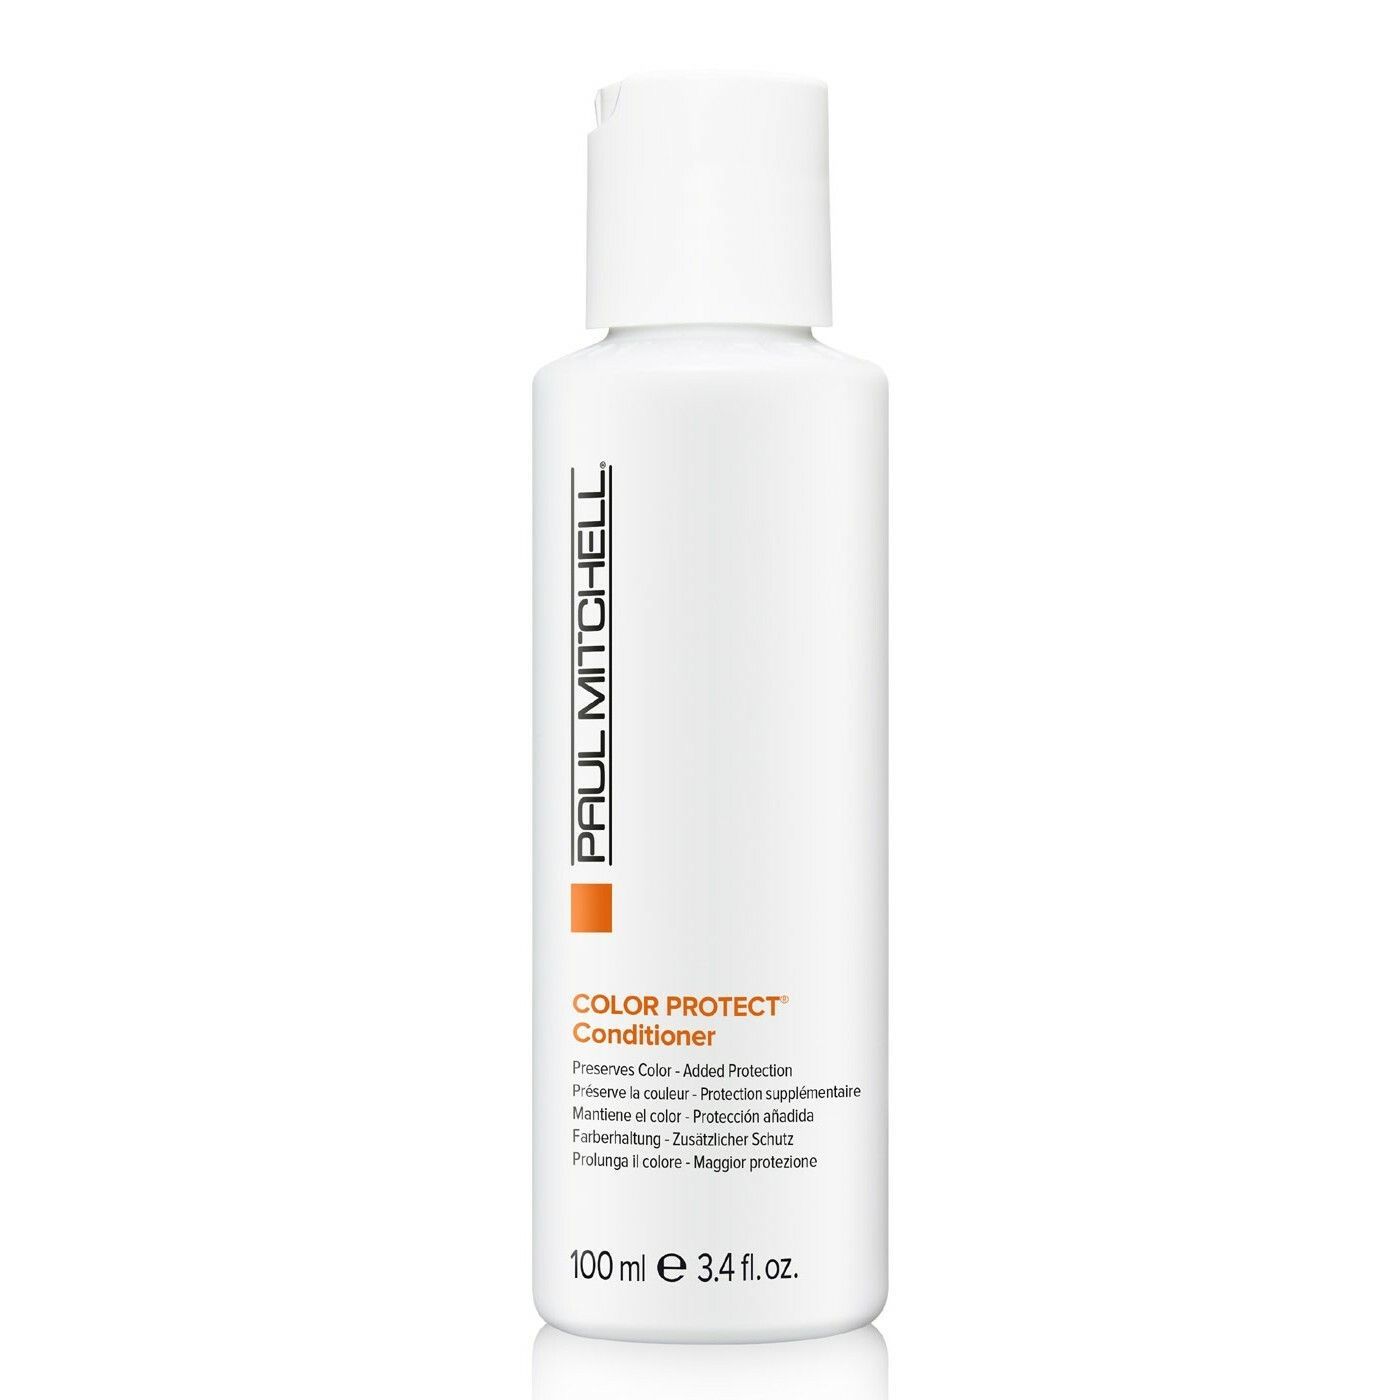 Paul Mitchell Color Protect Daily Conditioner - 100ml